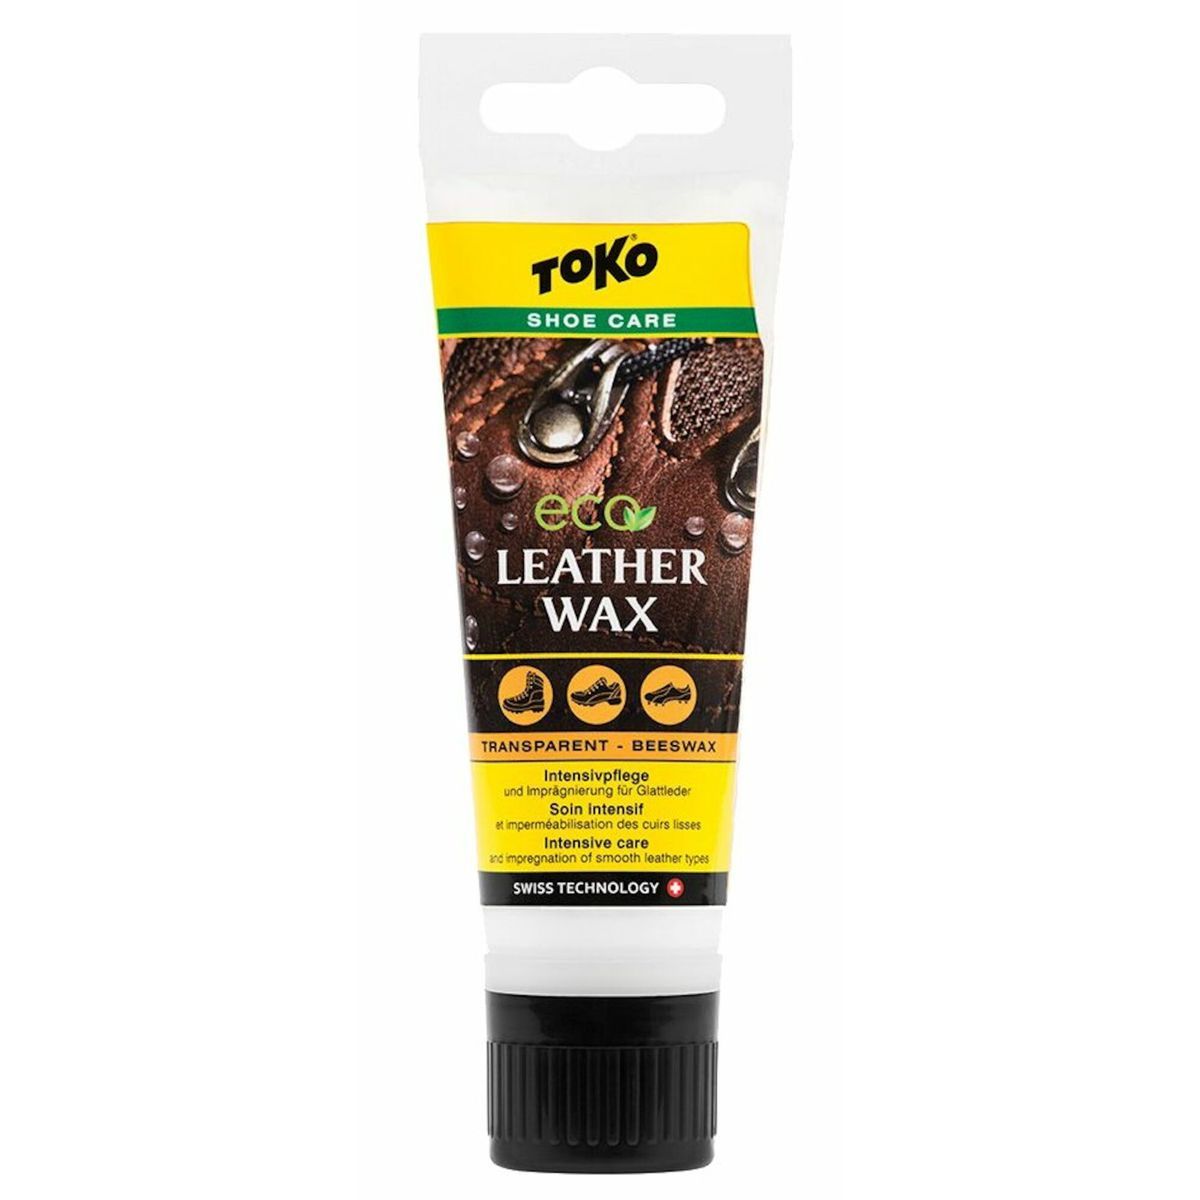 Image of Toko Leather Wax Beeswax 75 ml Shoe Care